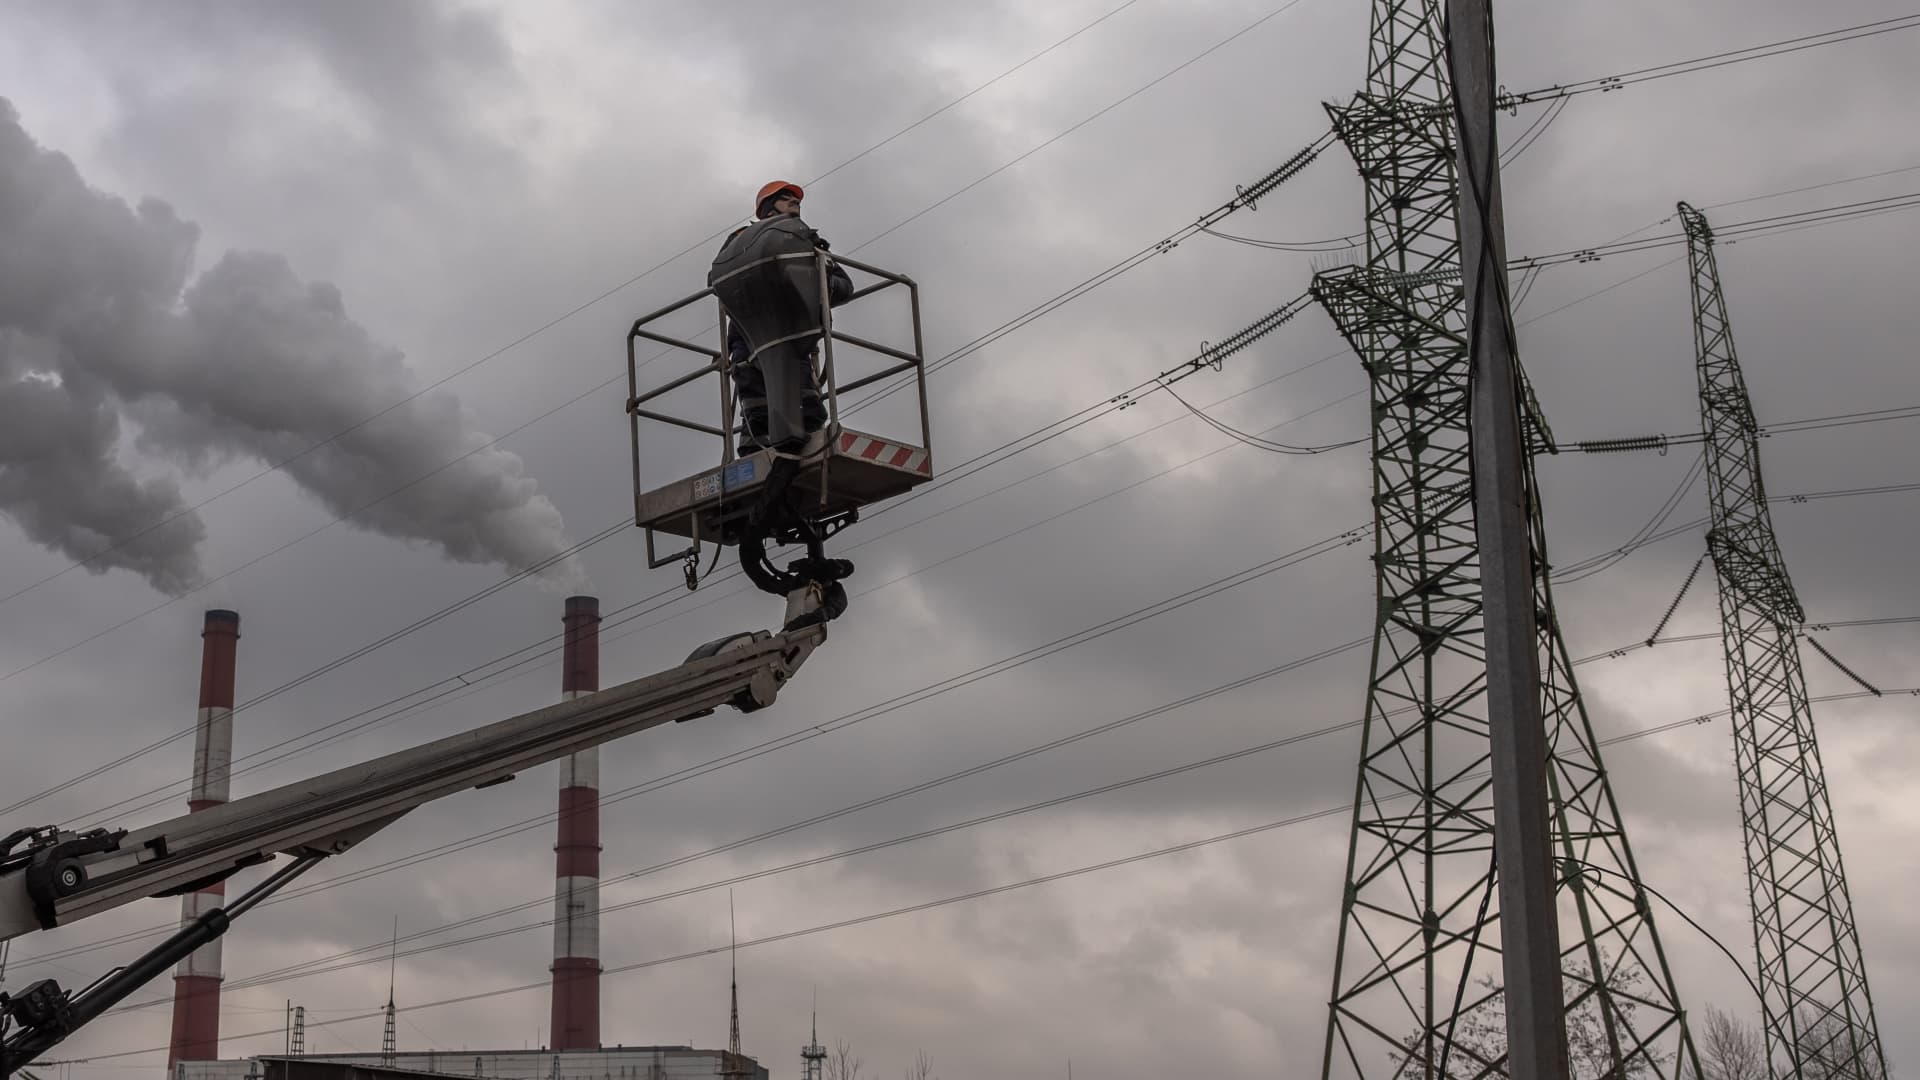 A worker is being lifted to repair electricity cables at an industrial area following a morning Russian missile strike that left one person dead and two wounded on January 26, 2023 in Kyiv, Ukraine.